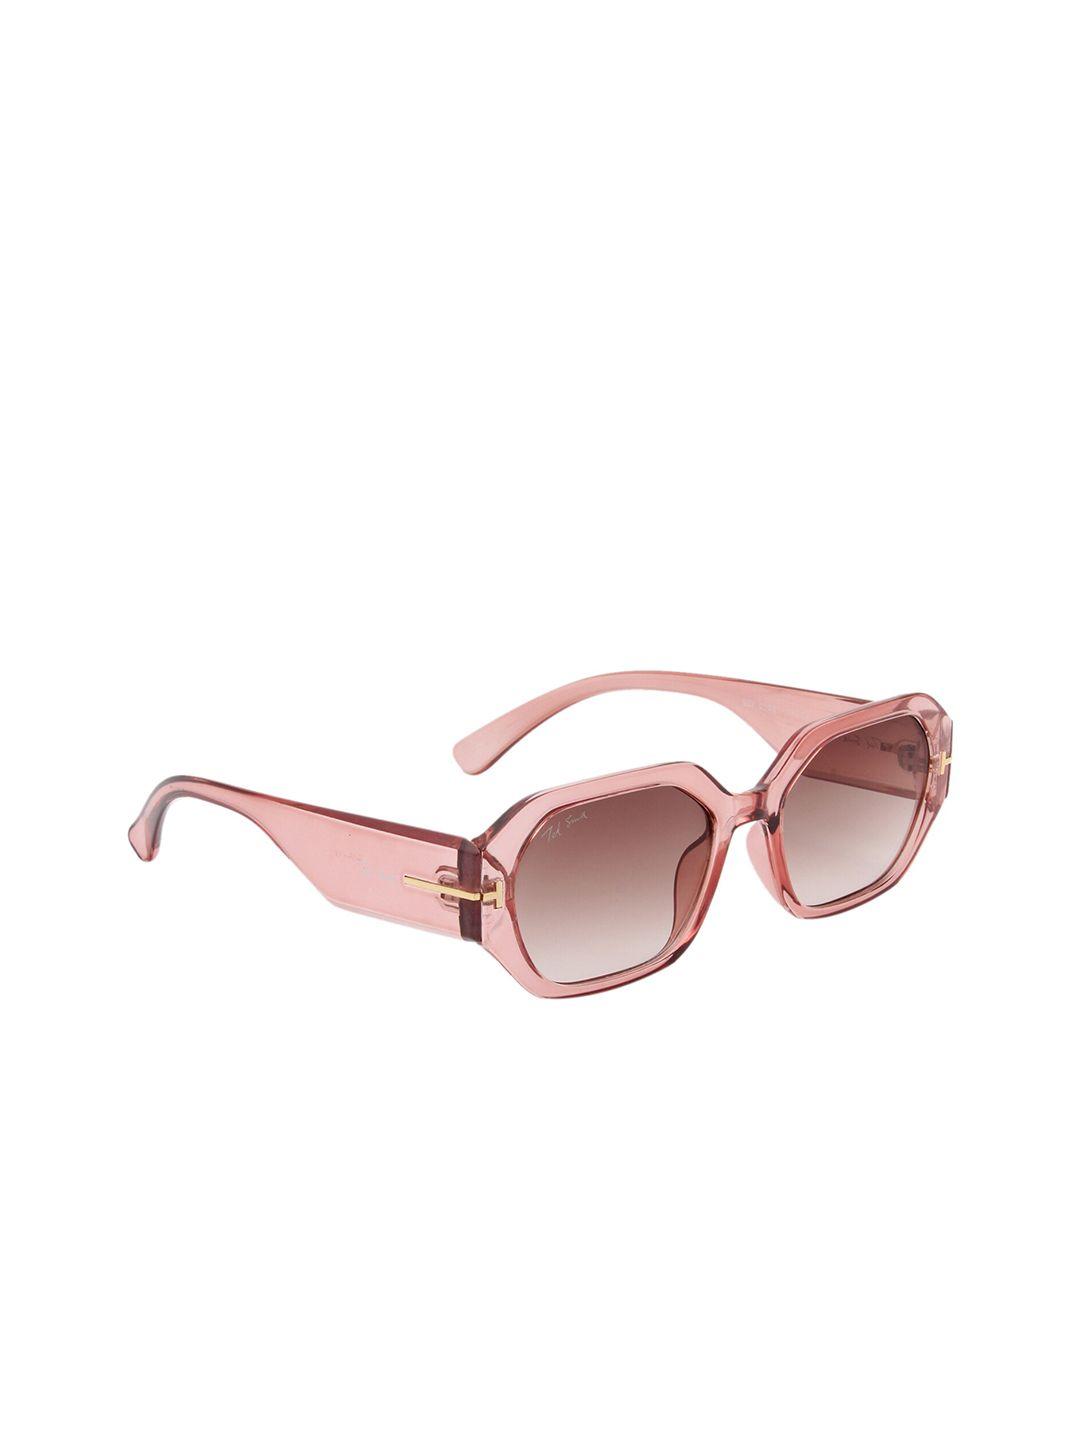 ted smith unisex brown lens & pink oval sunglasses with uv protected lens rapper_c8-brown